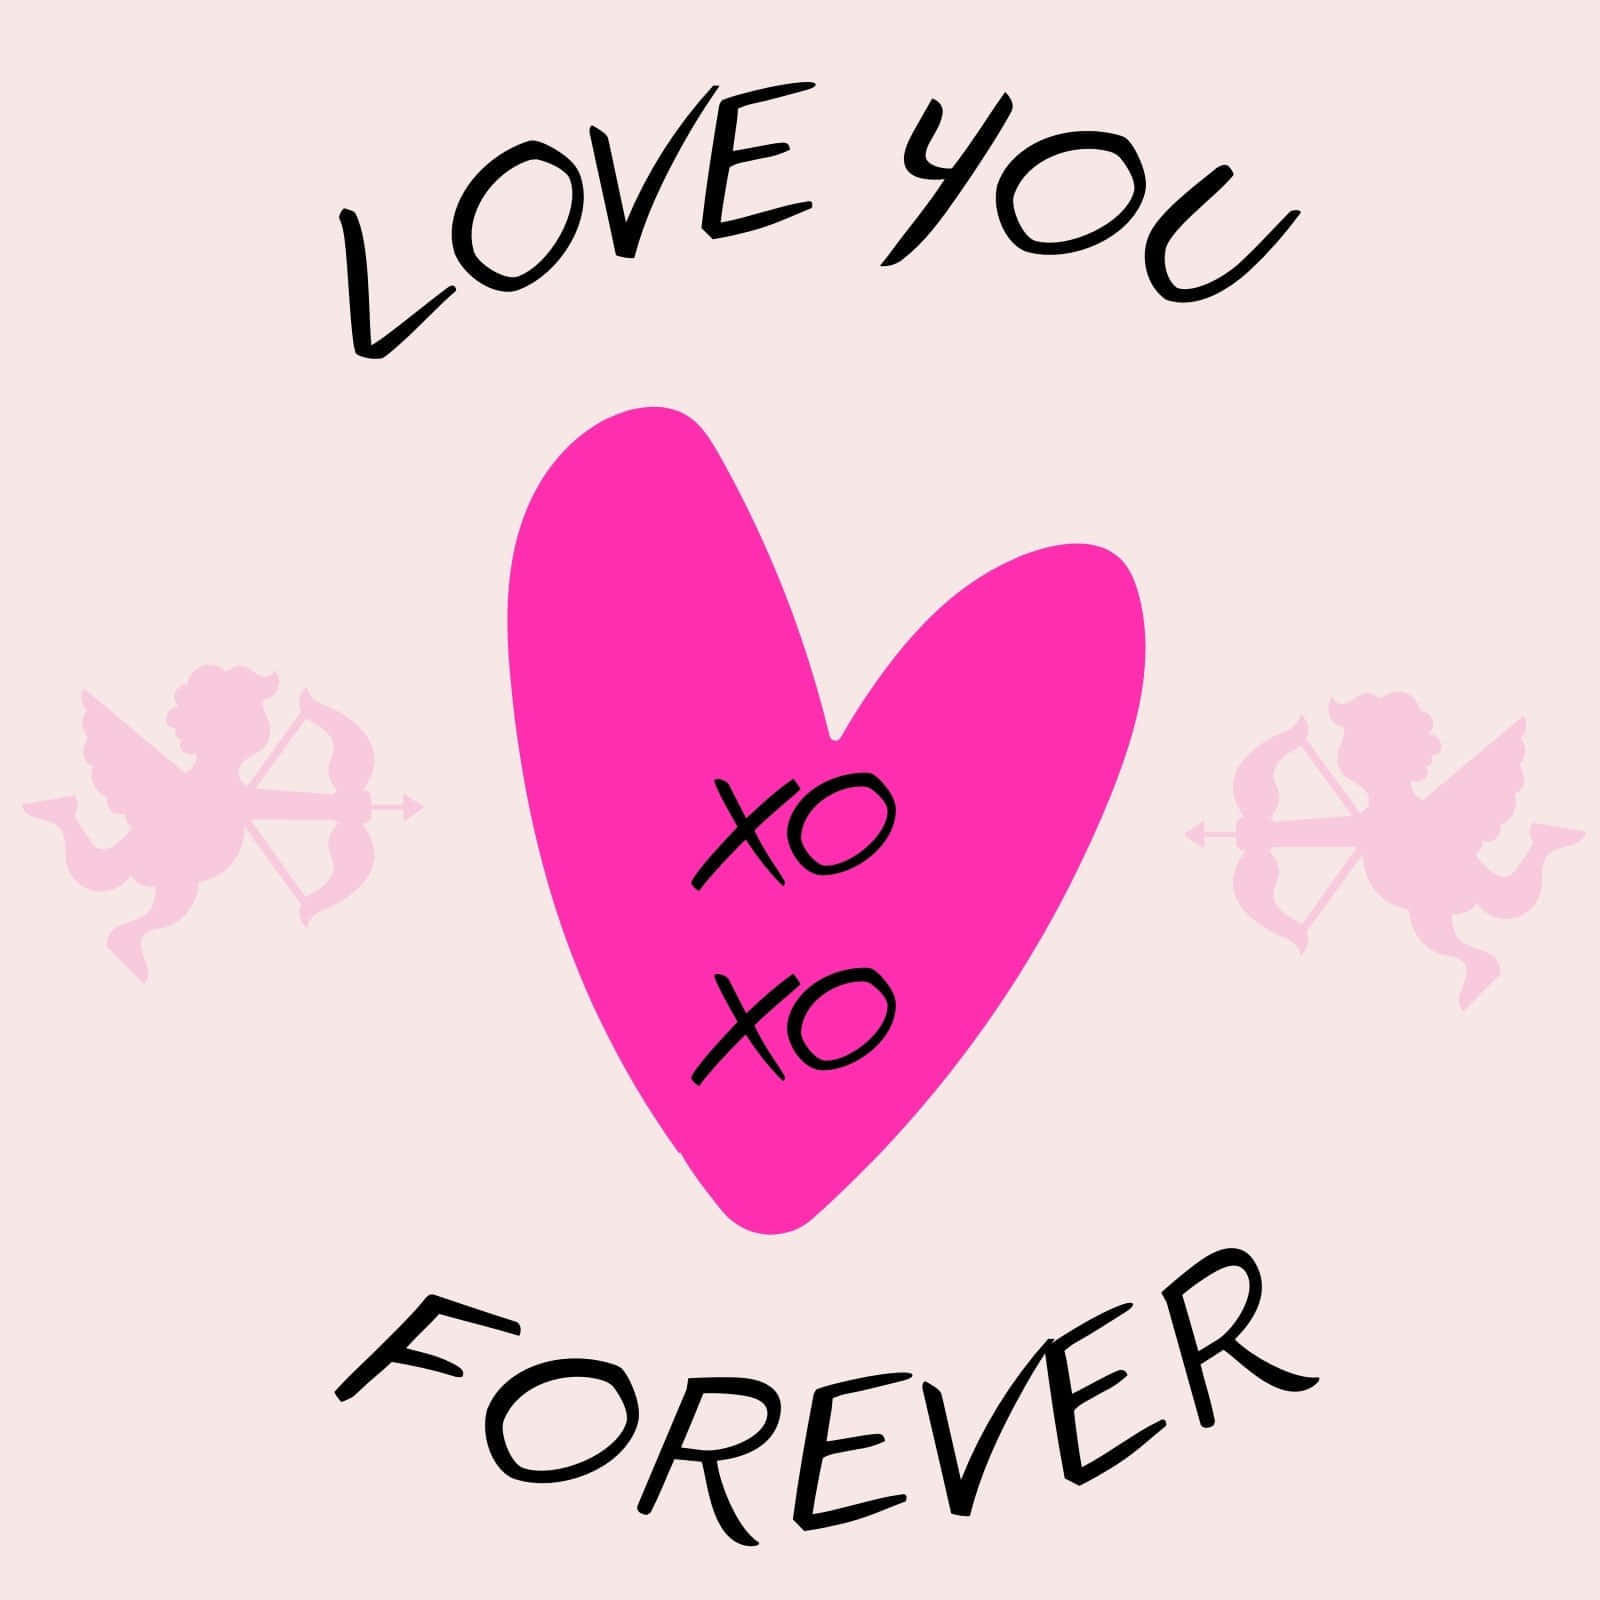 Love You Xoxo Forever Aesthetic Valentine's Day Wallpaper